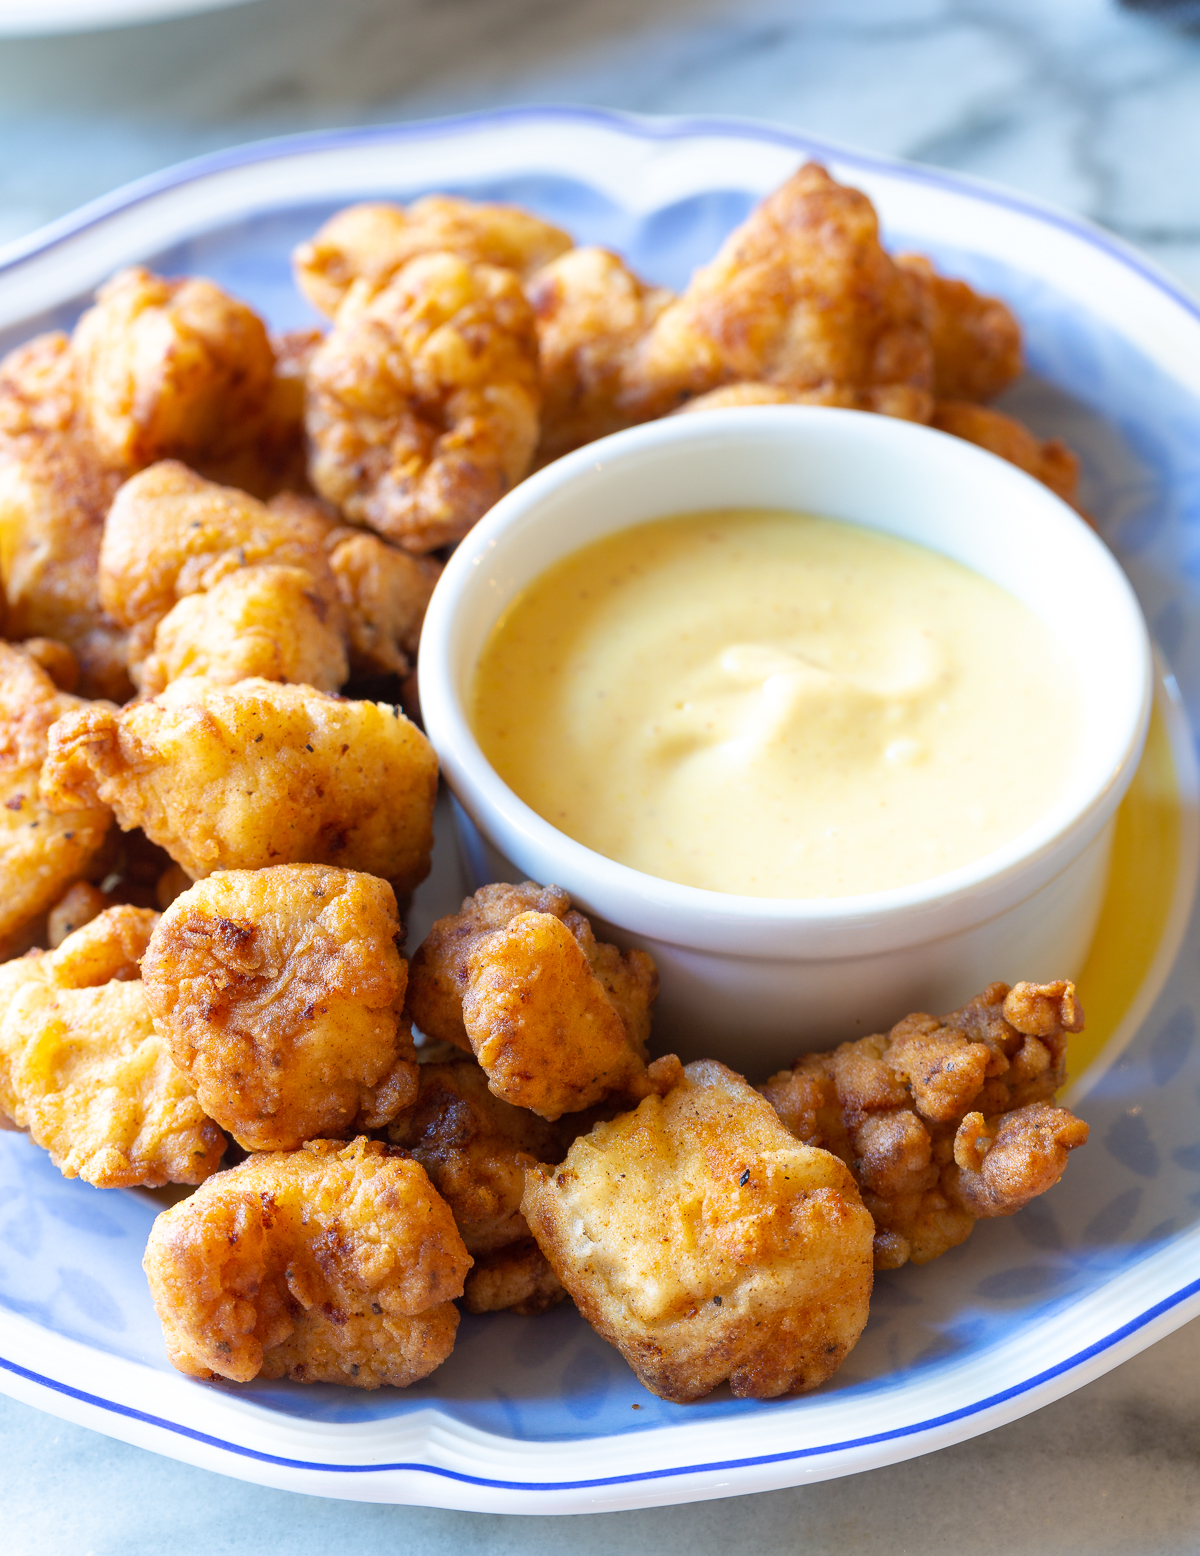 Chick fil a nuggets and sauce - close up on plate